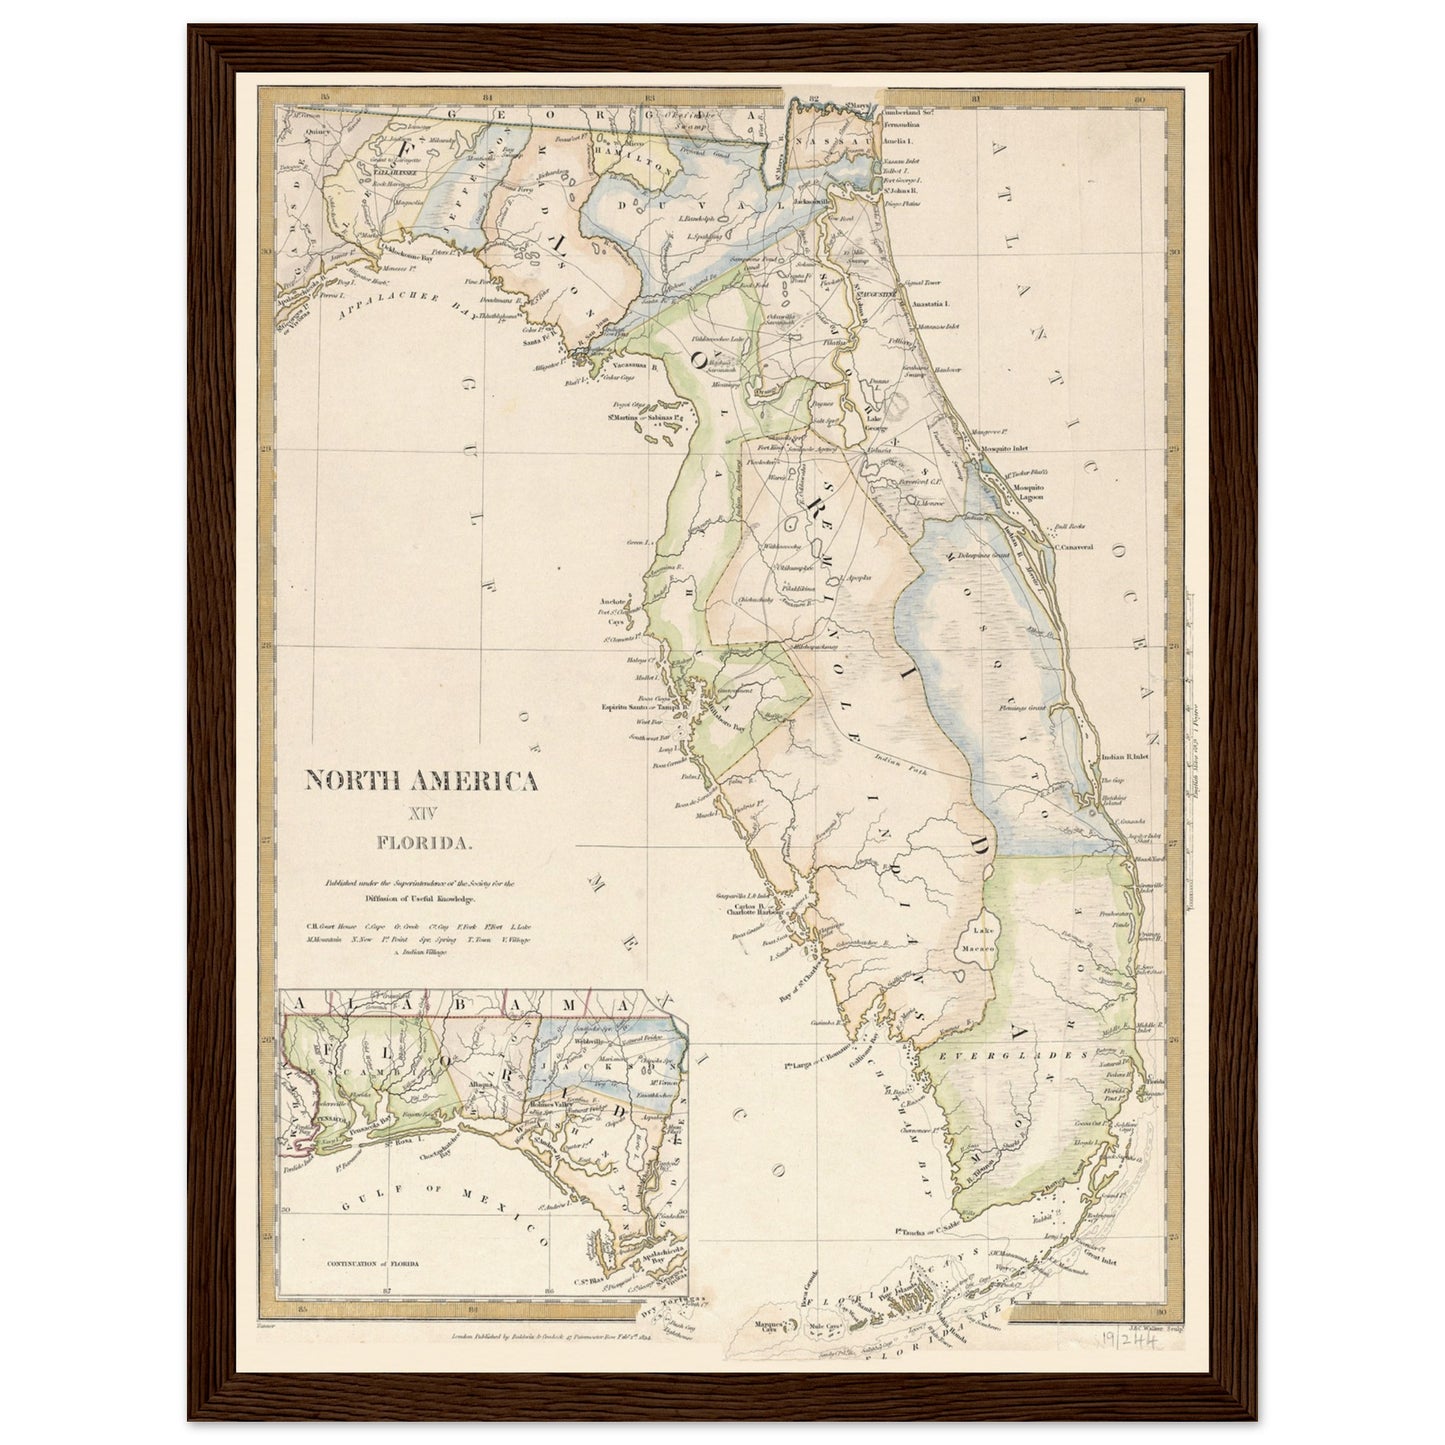 Henry Tanner map of Florida as a US territory in 1834.